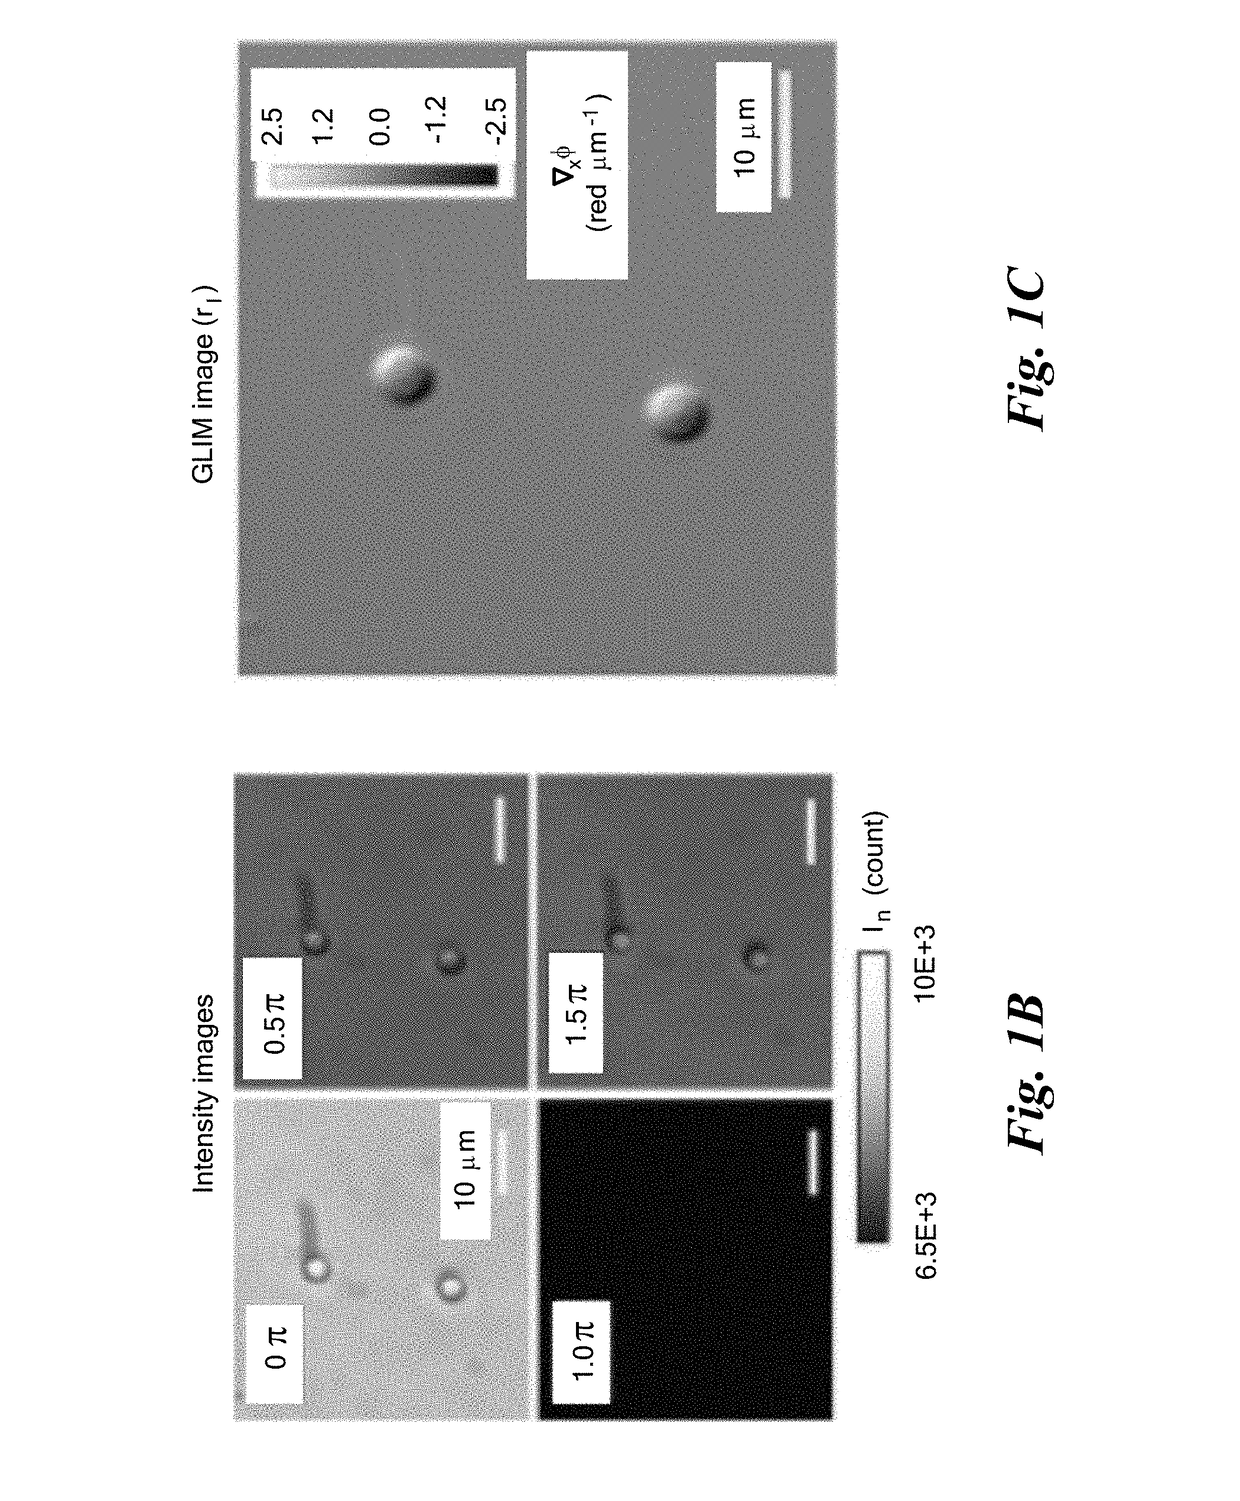 Gradient Light Interference Microscopy for 3D Imaging of Unlabeled Specimens